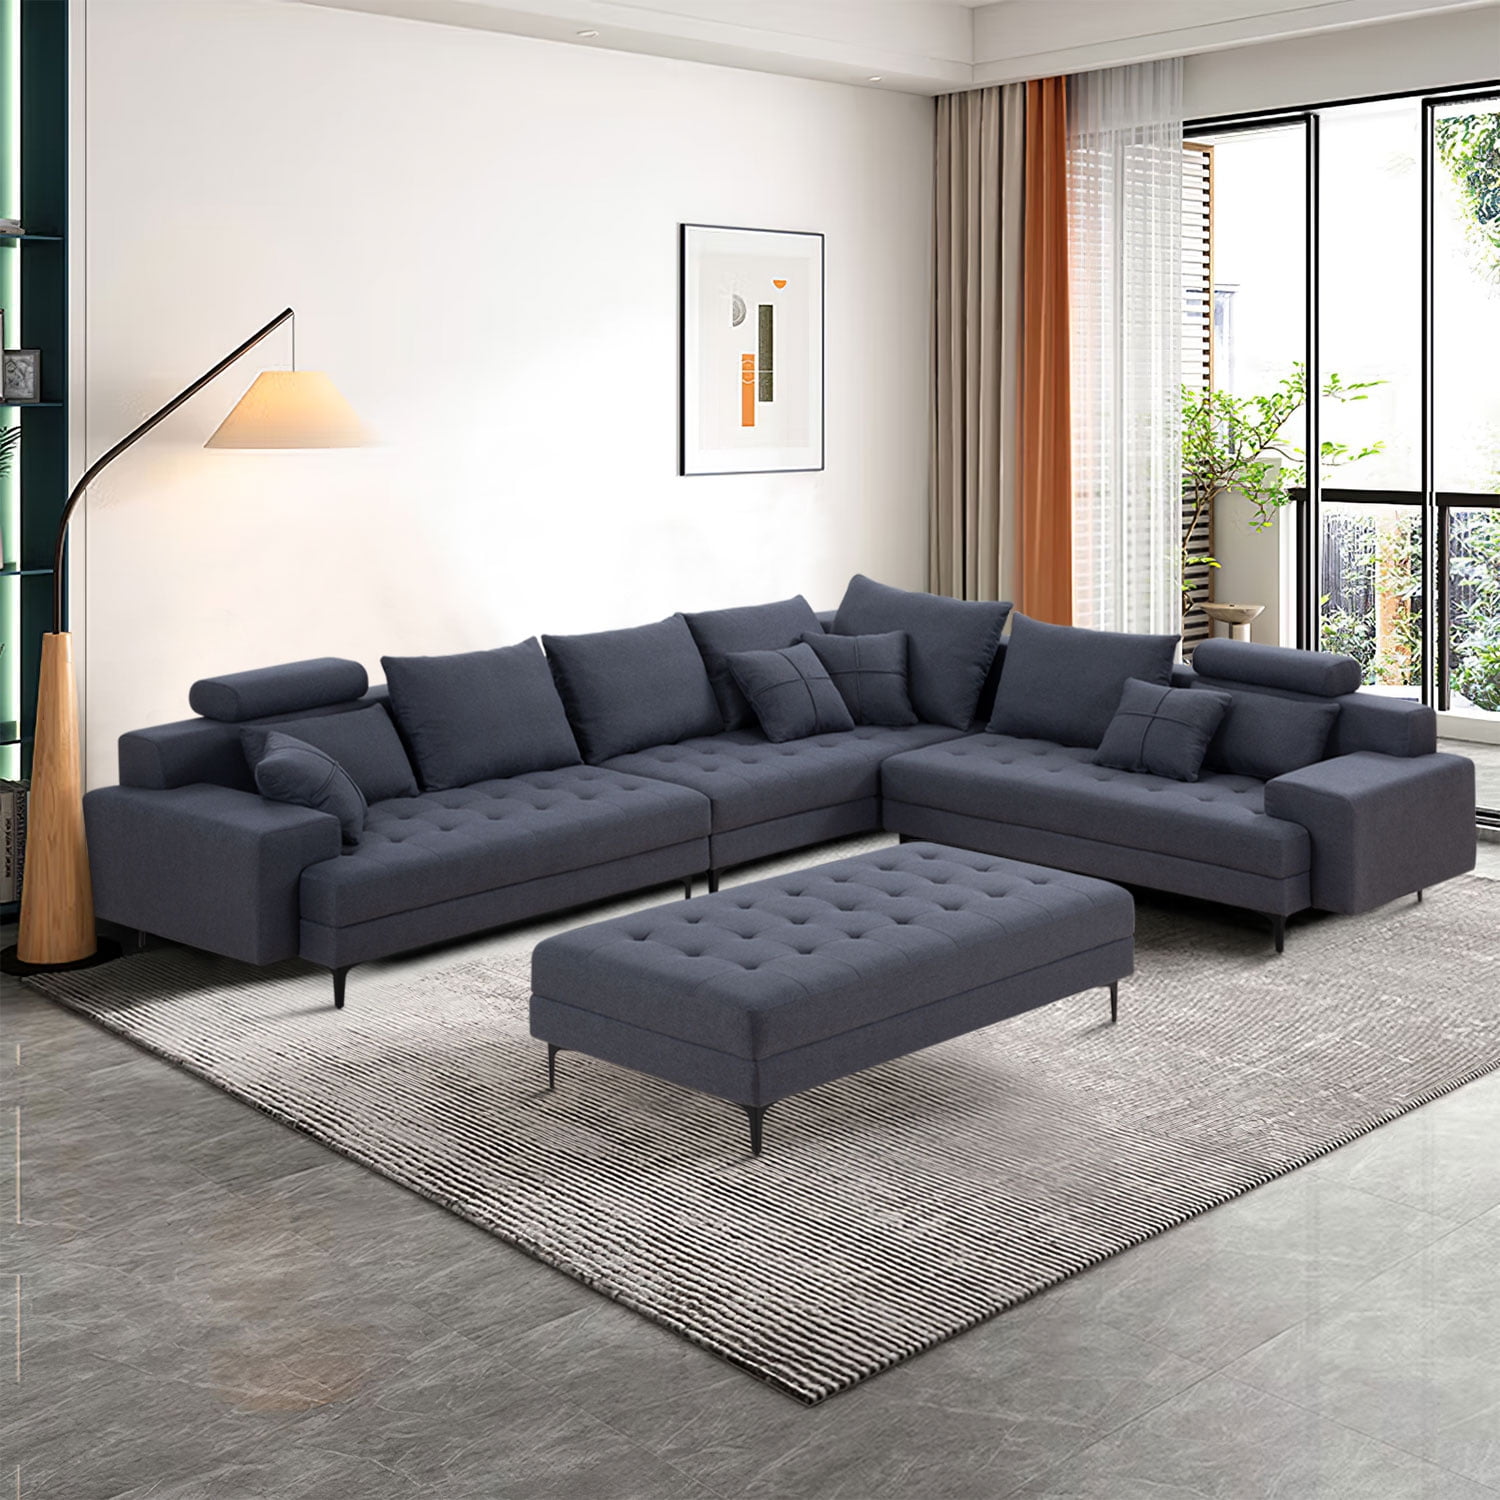 Williamspace 144'' Sectional Sofa Set with Ottoman,Oversized Luxry ...